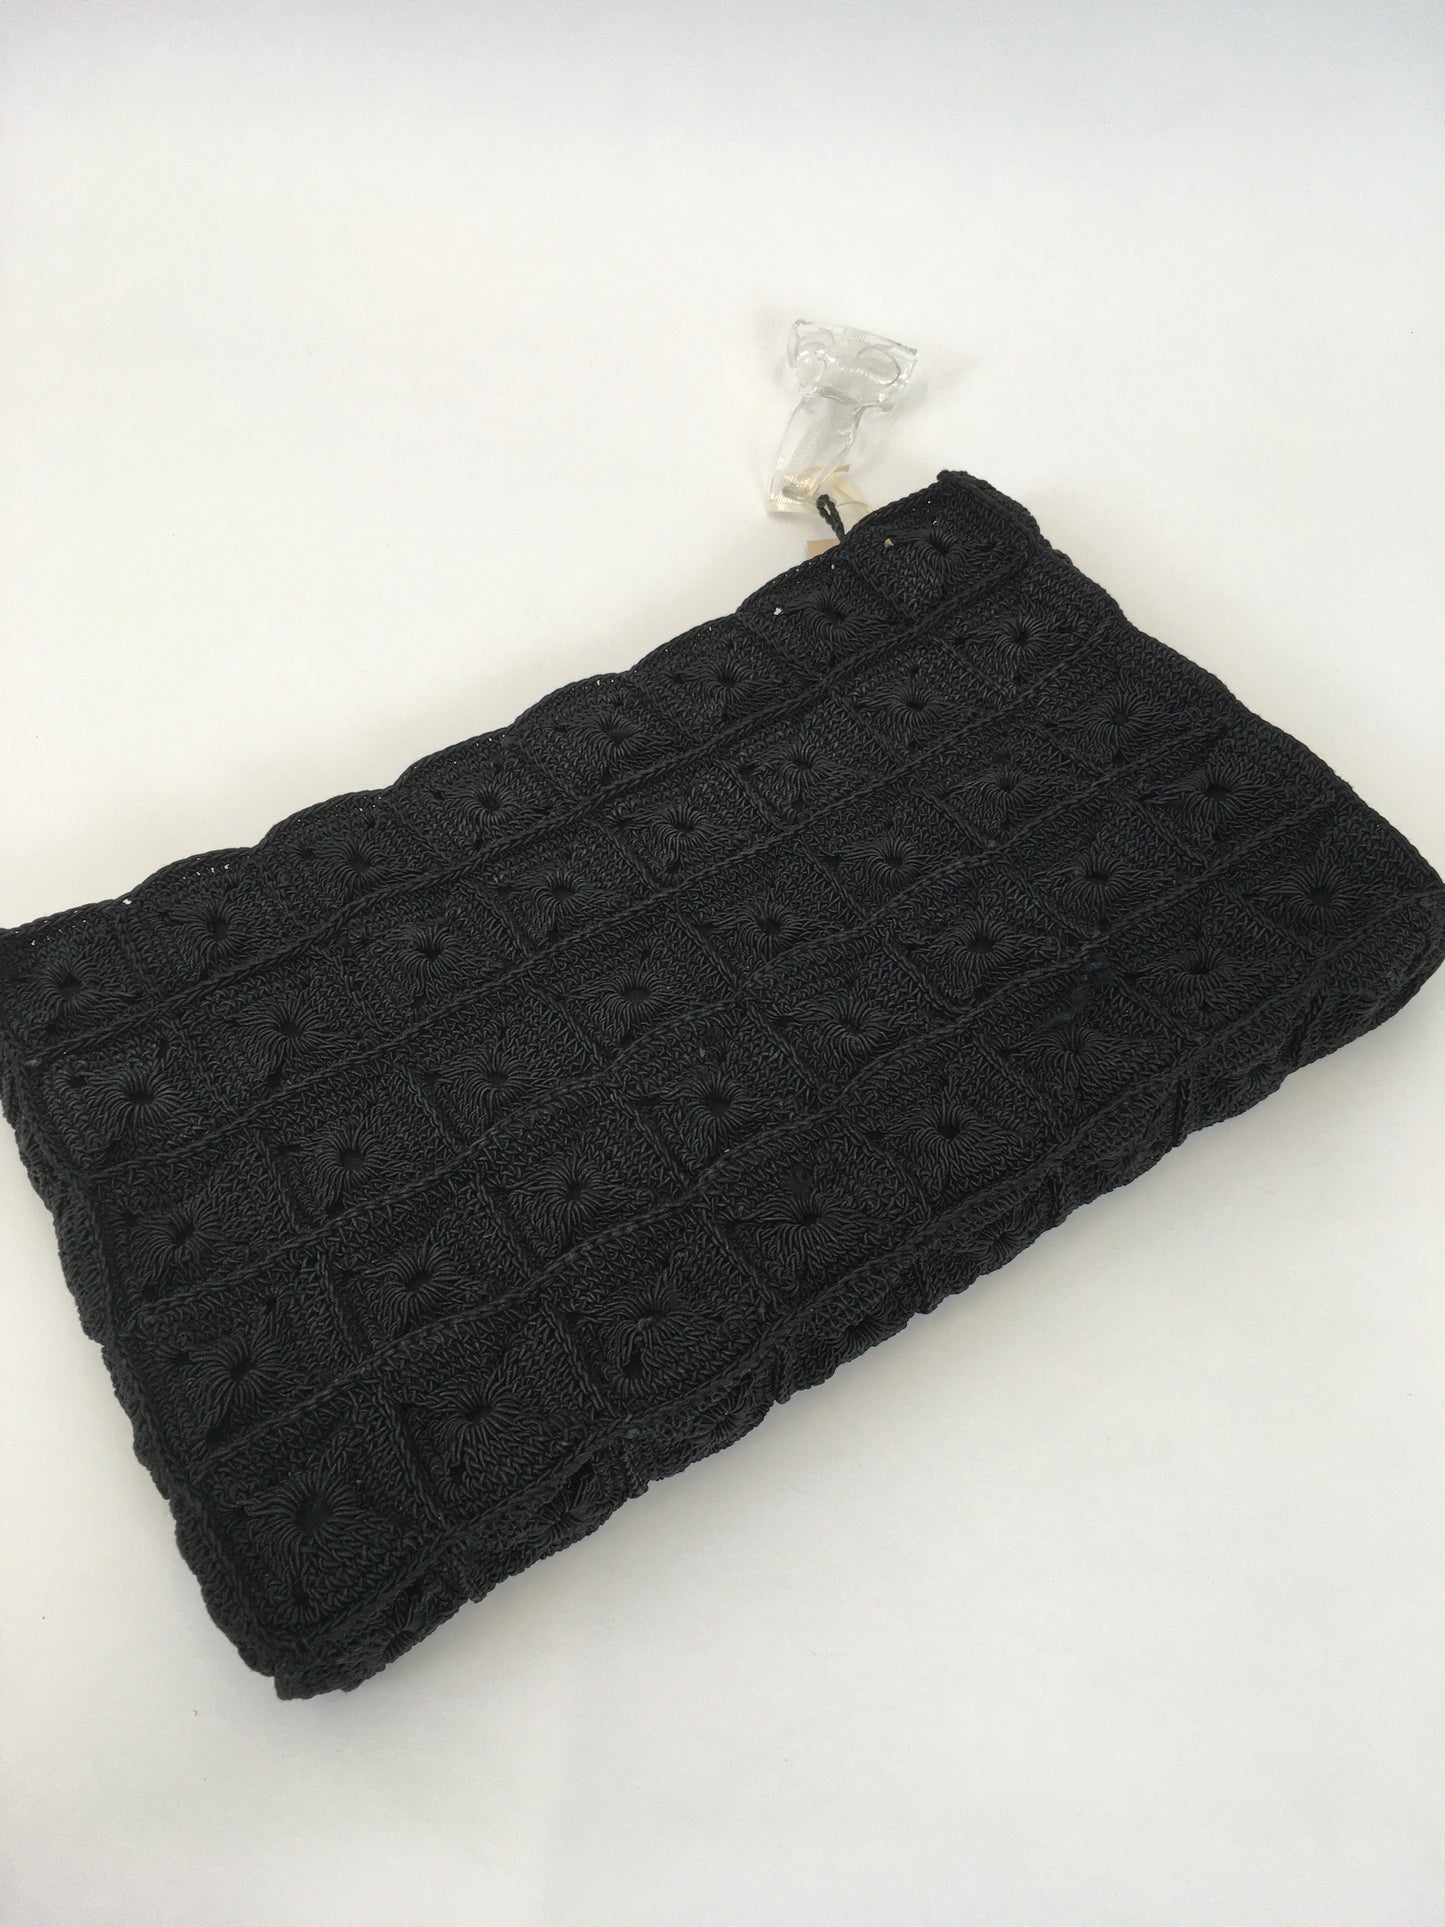 Original 1940s Stunning Black Crochet Clutch Bag - With Fabulous Lucite Pull